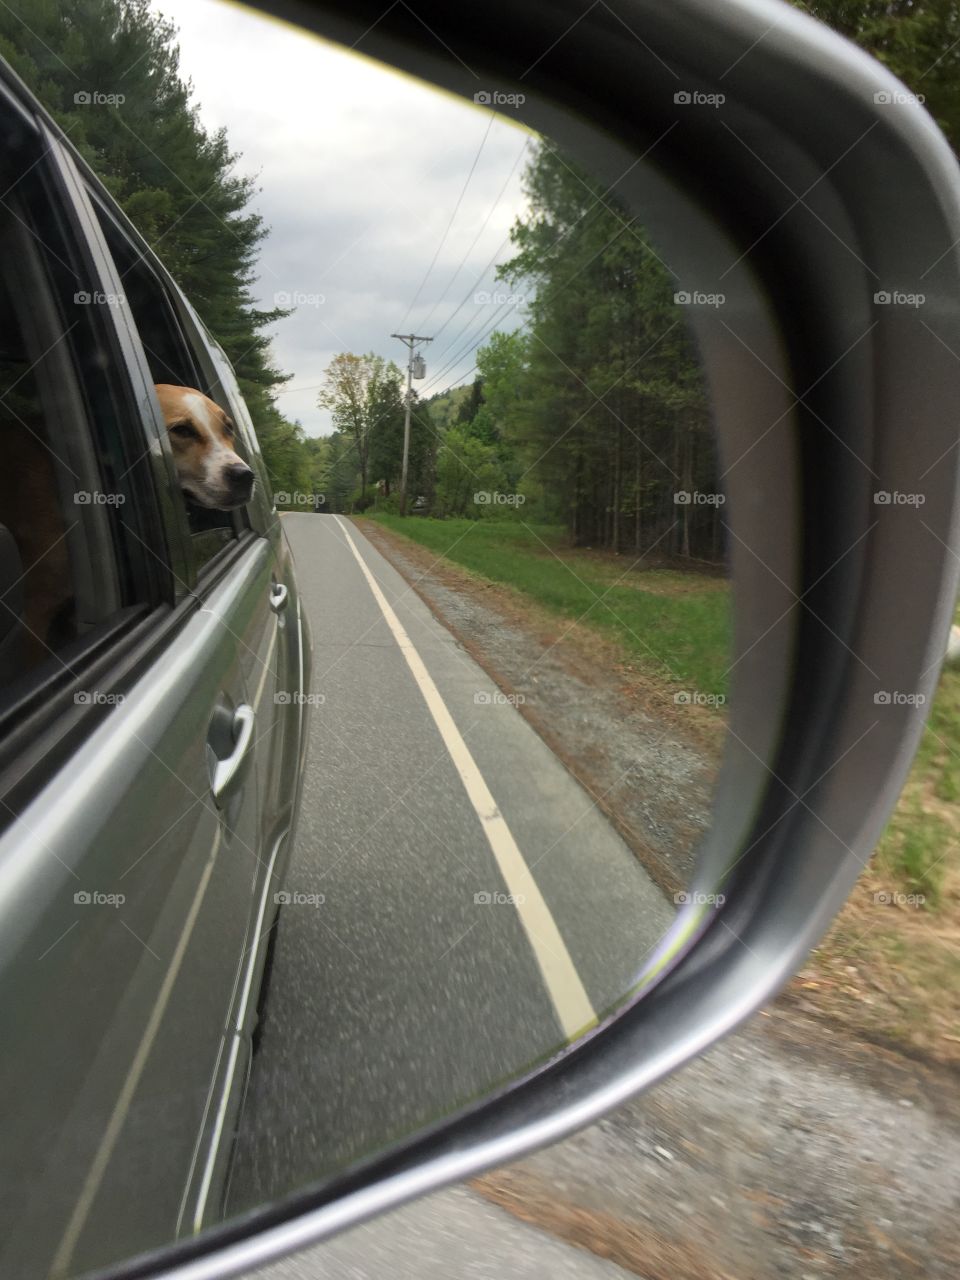 Dog hanging out window. Dog hanging out suv window